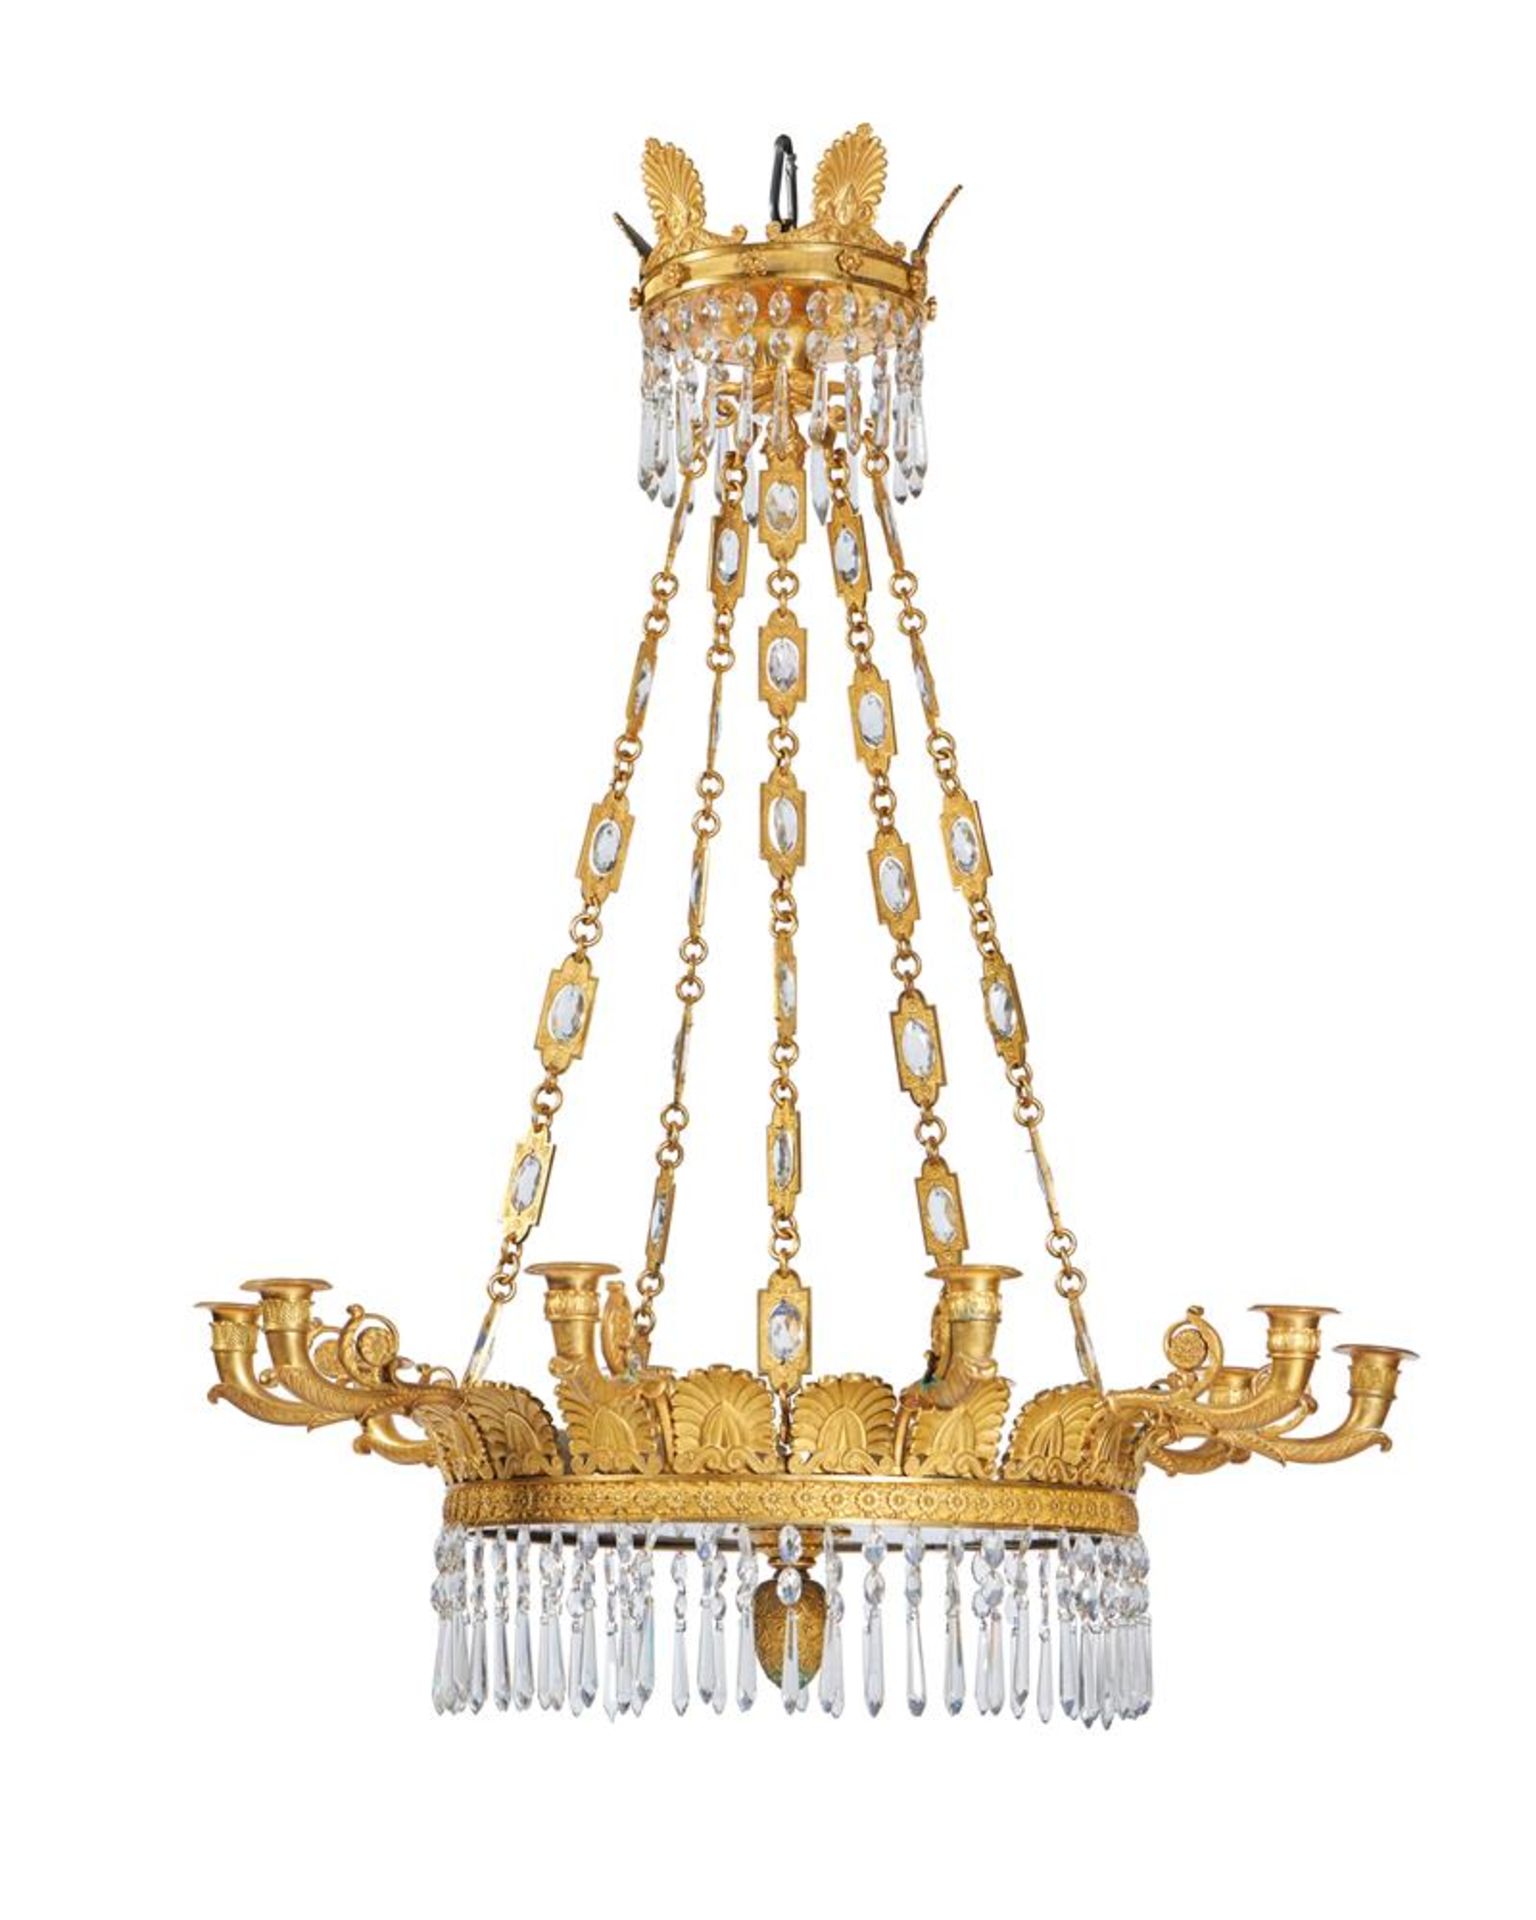 A NORTH EUROPEAN ORMOLU, CLEAR AND BLUE GLASS TEN LIGHT CHANDELIER, EARLY 19TH CENTURY